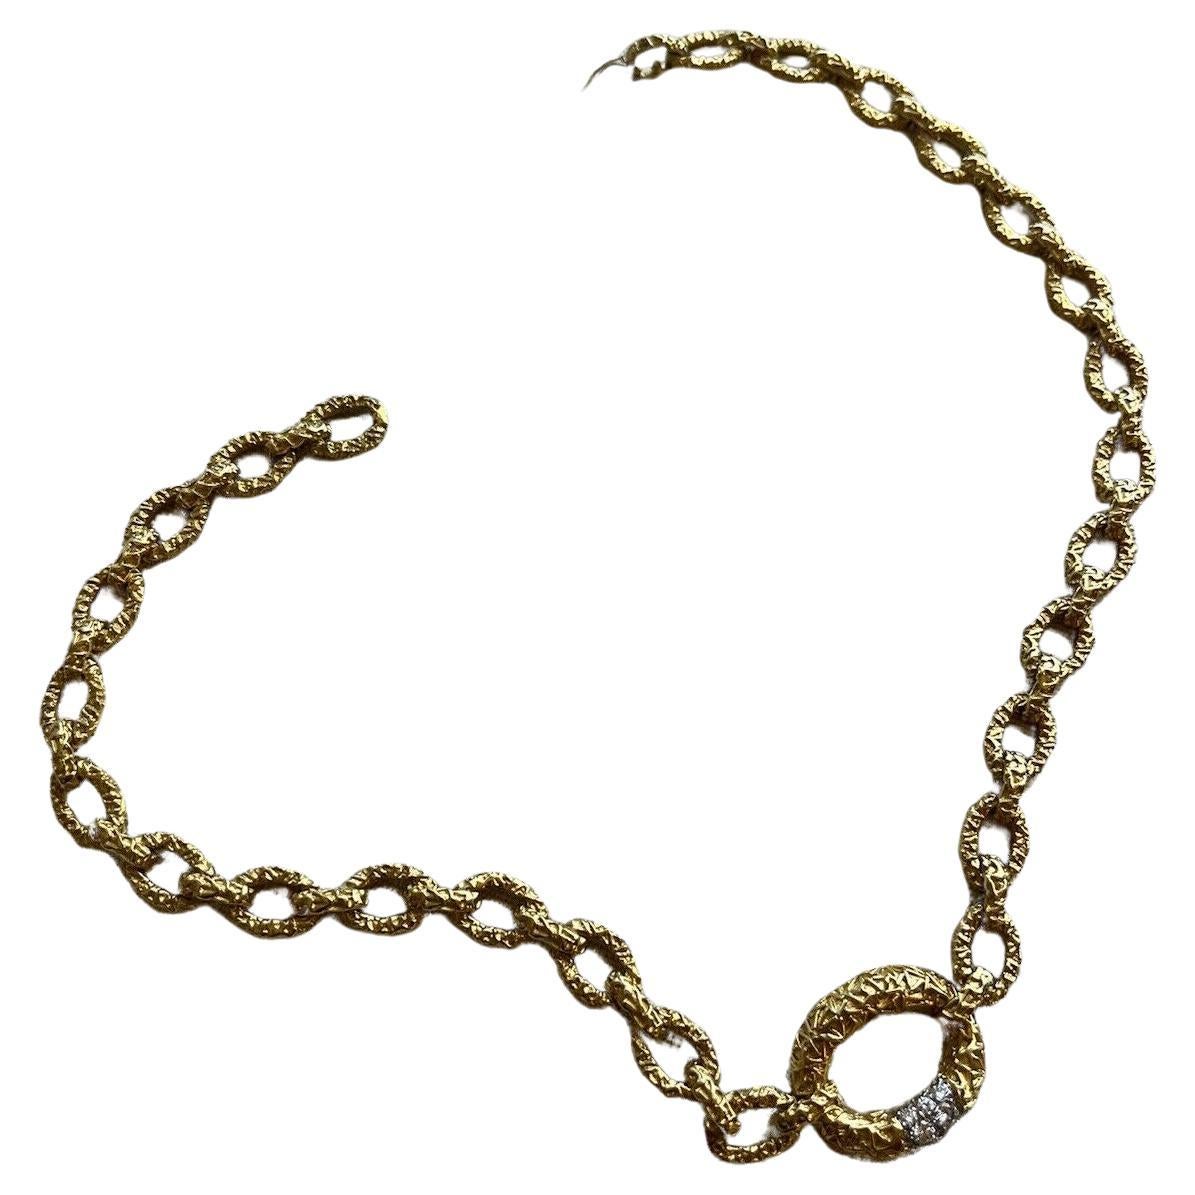 VAN CLEEF & ARPELS NY 18k Hammered Yellow Gold & Diamond Choker Necklace 1970s